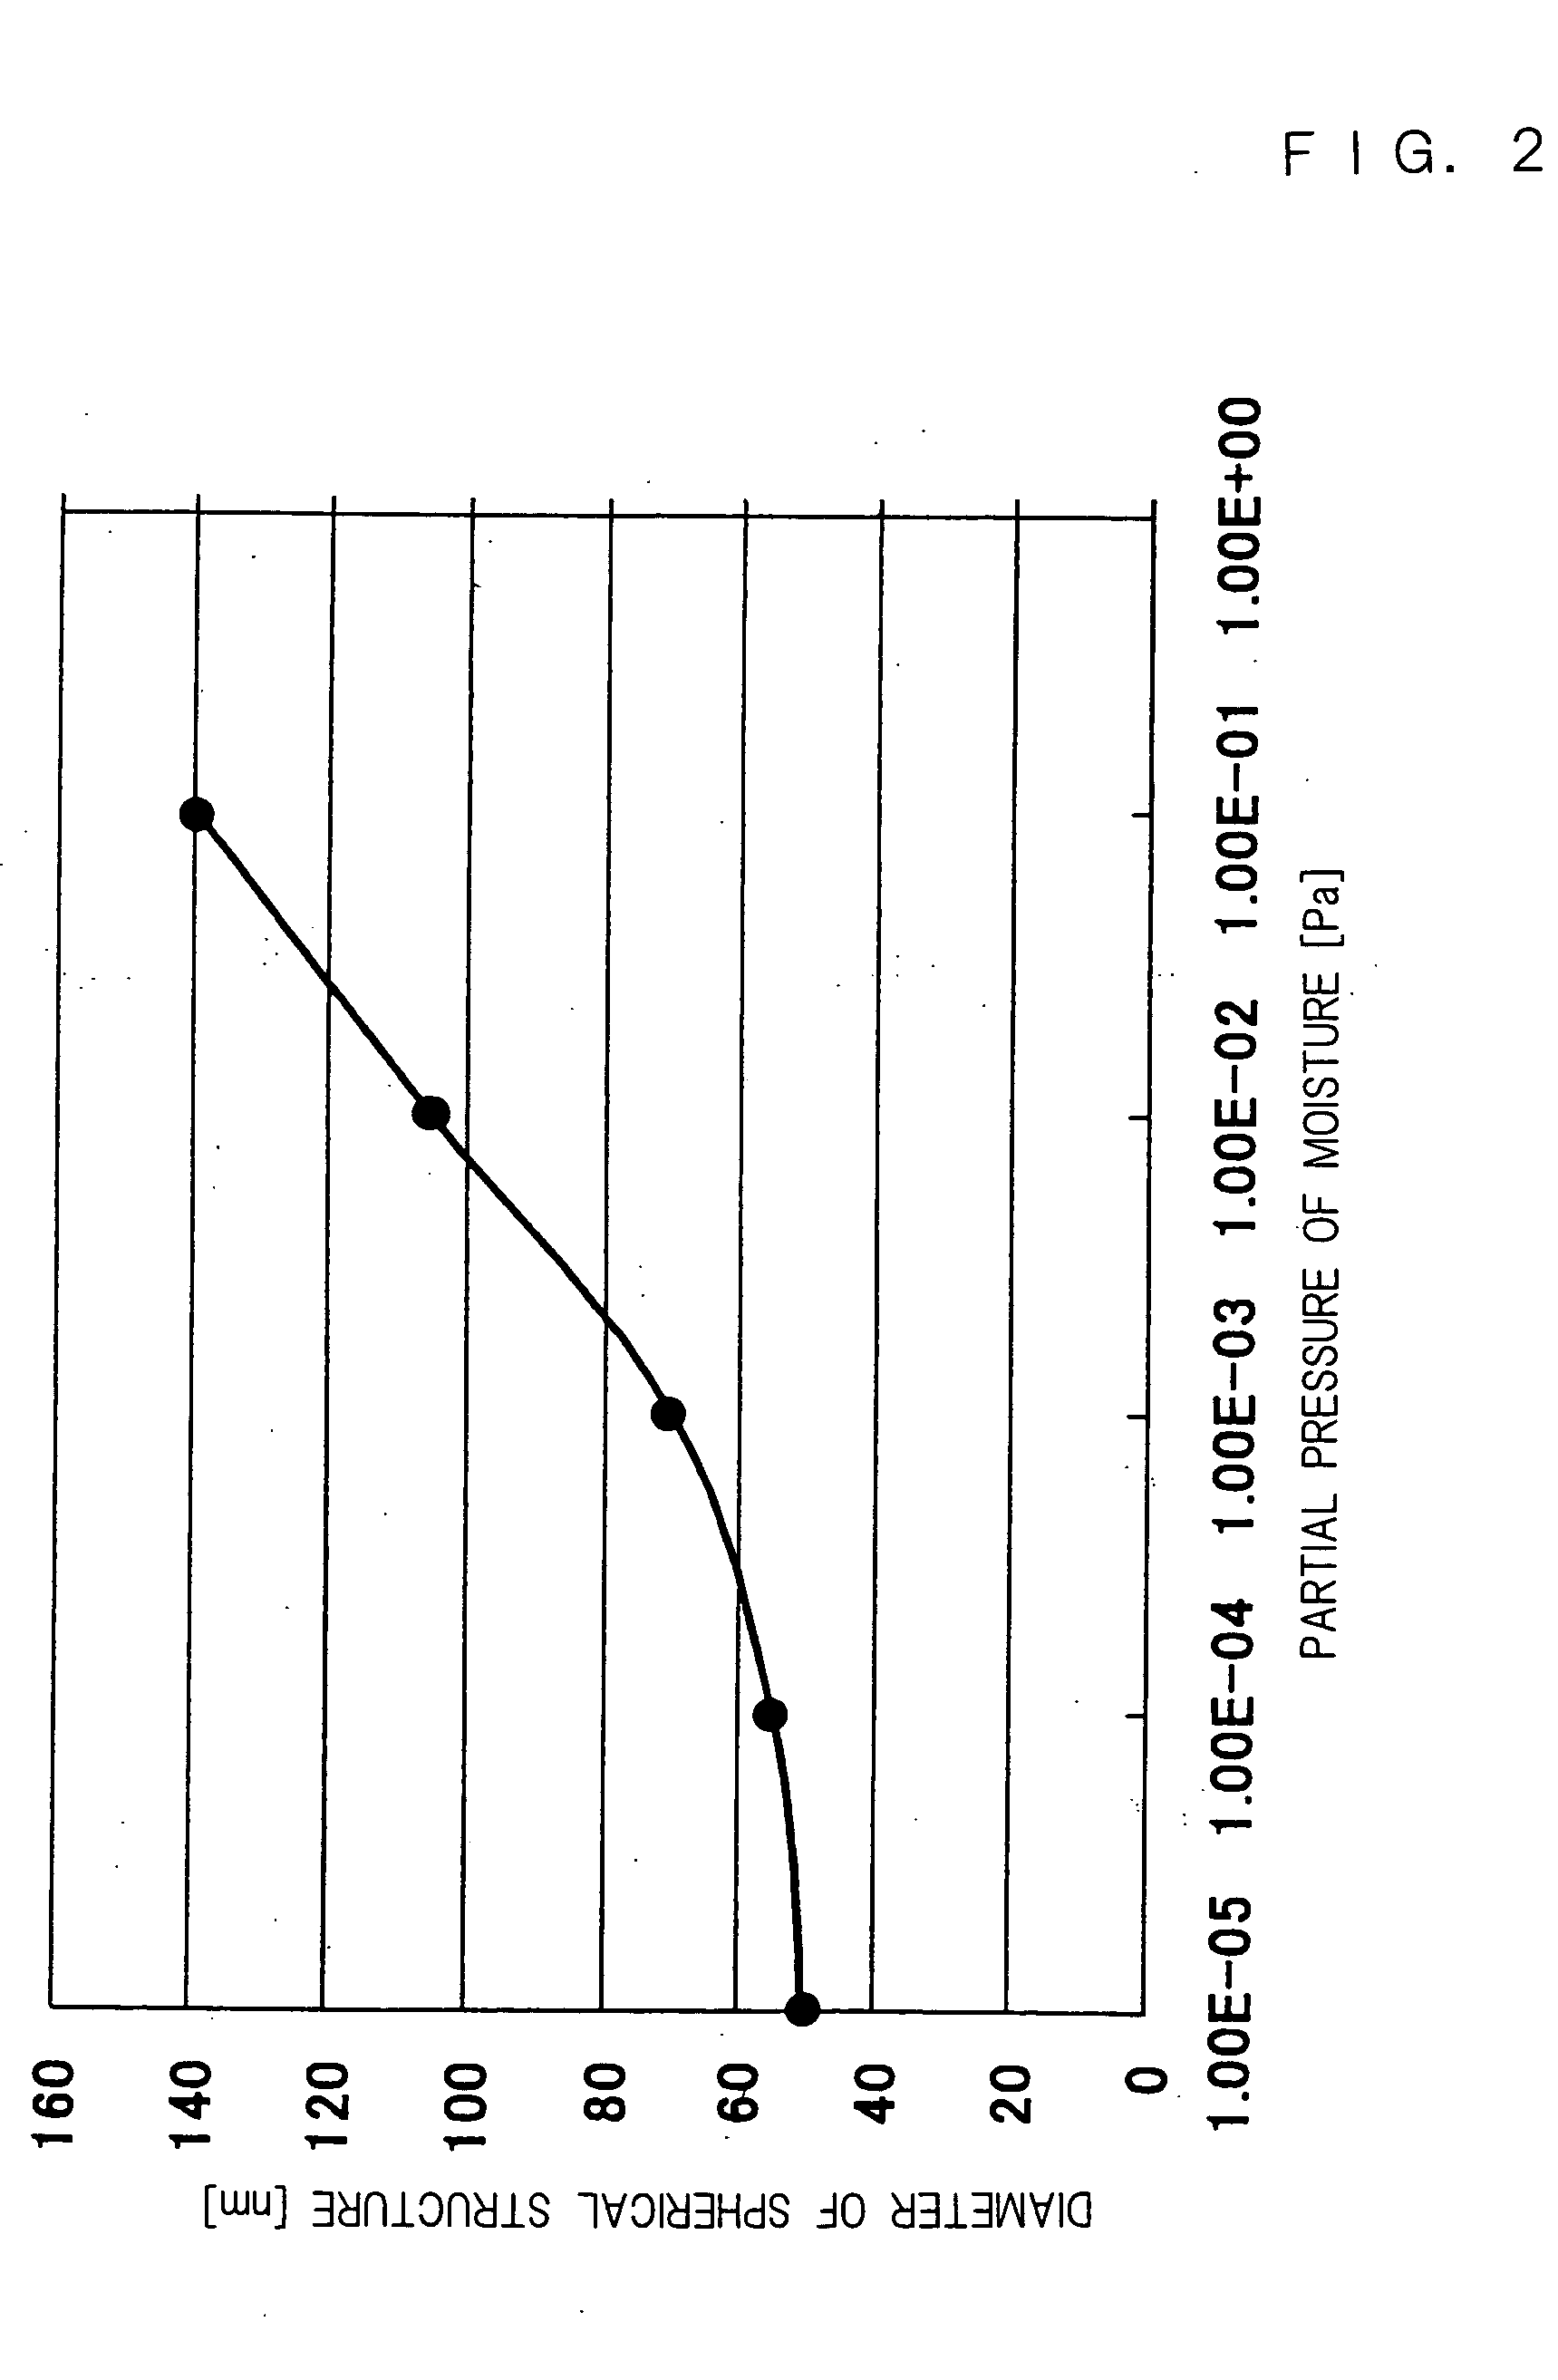 Flexible printed circuit board and process for producing the same